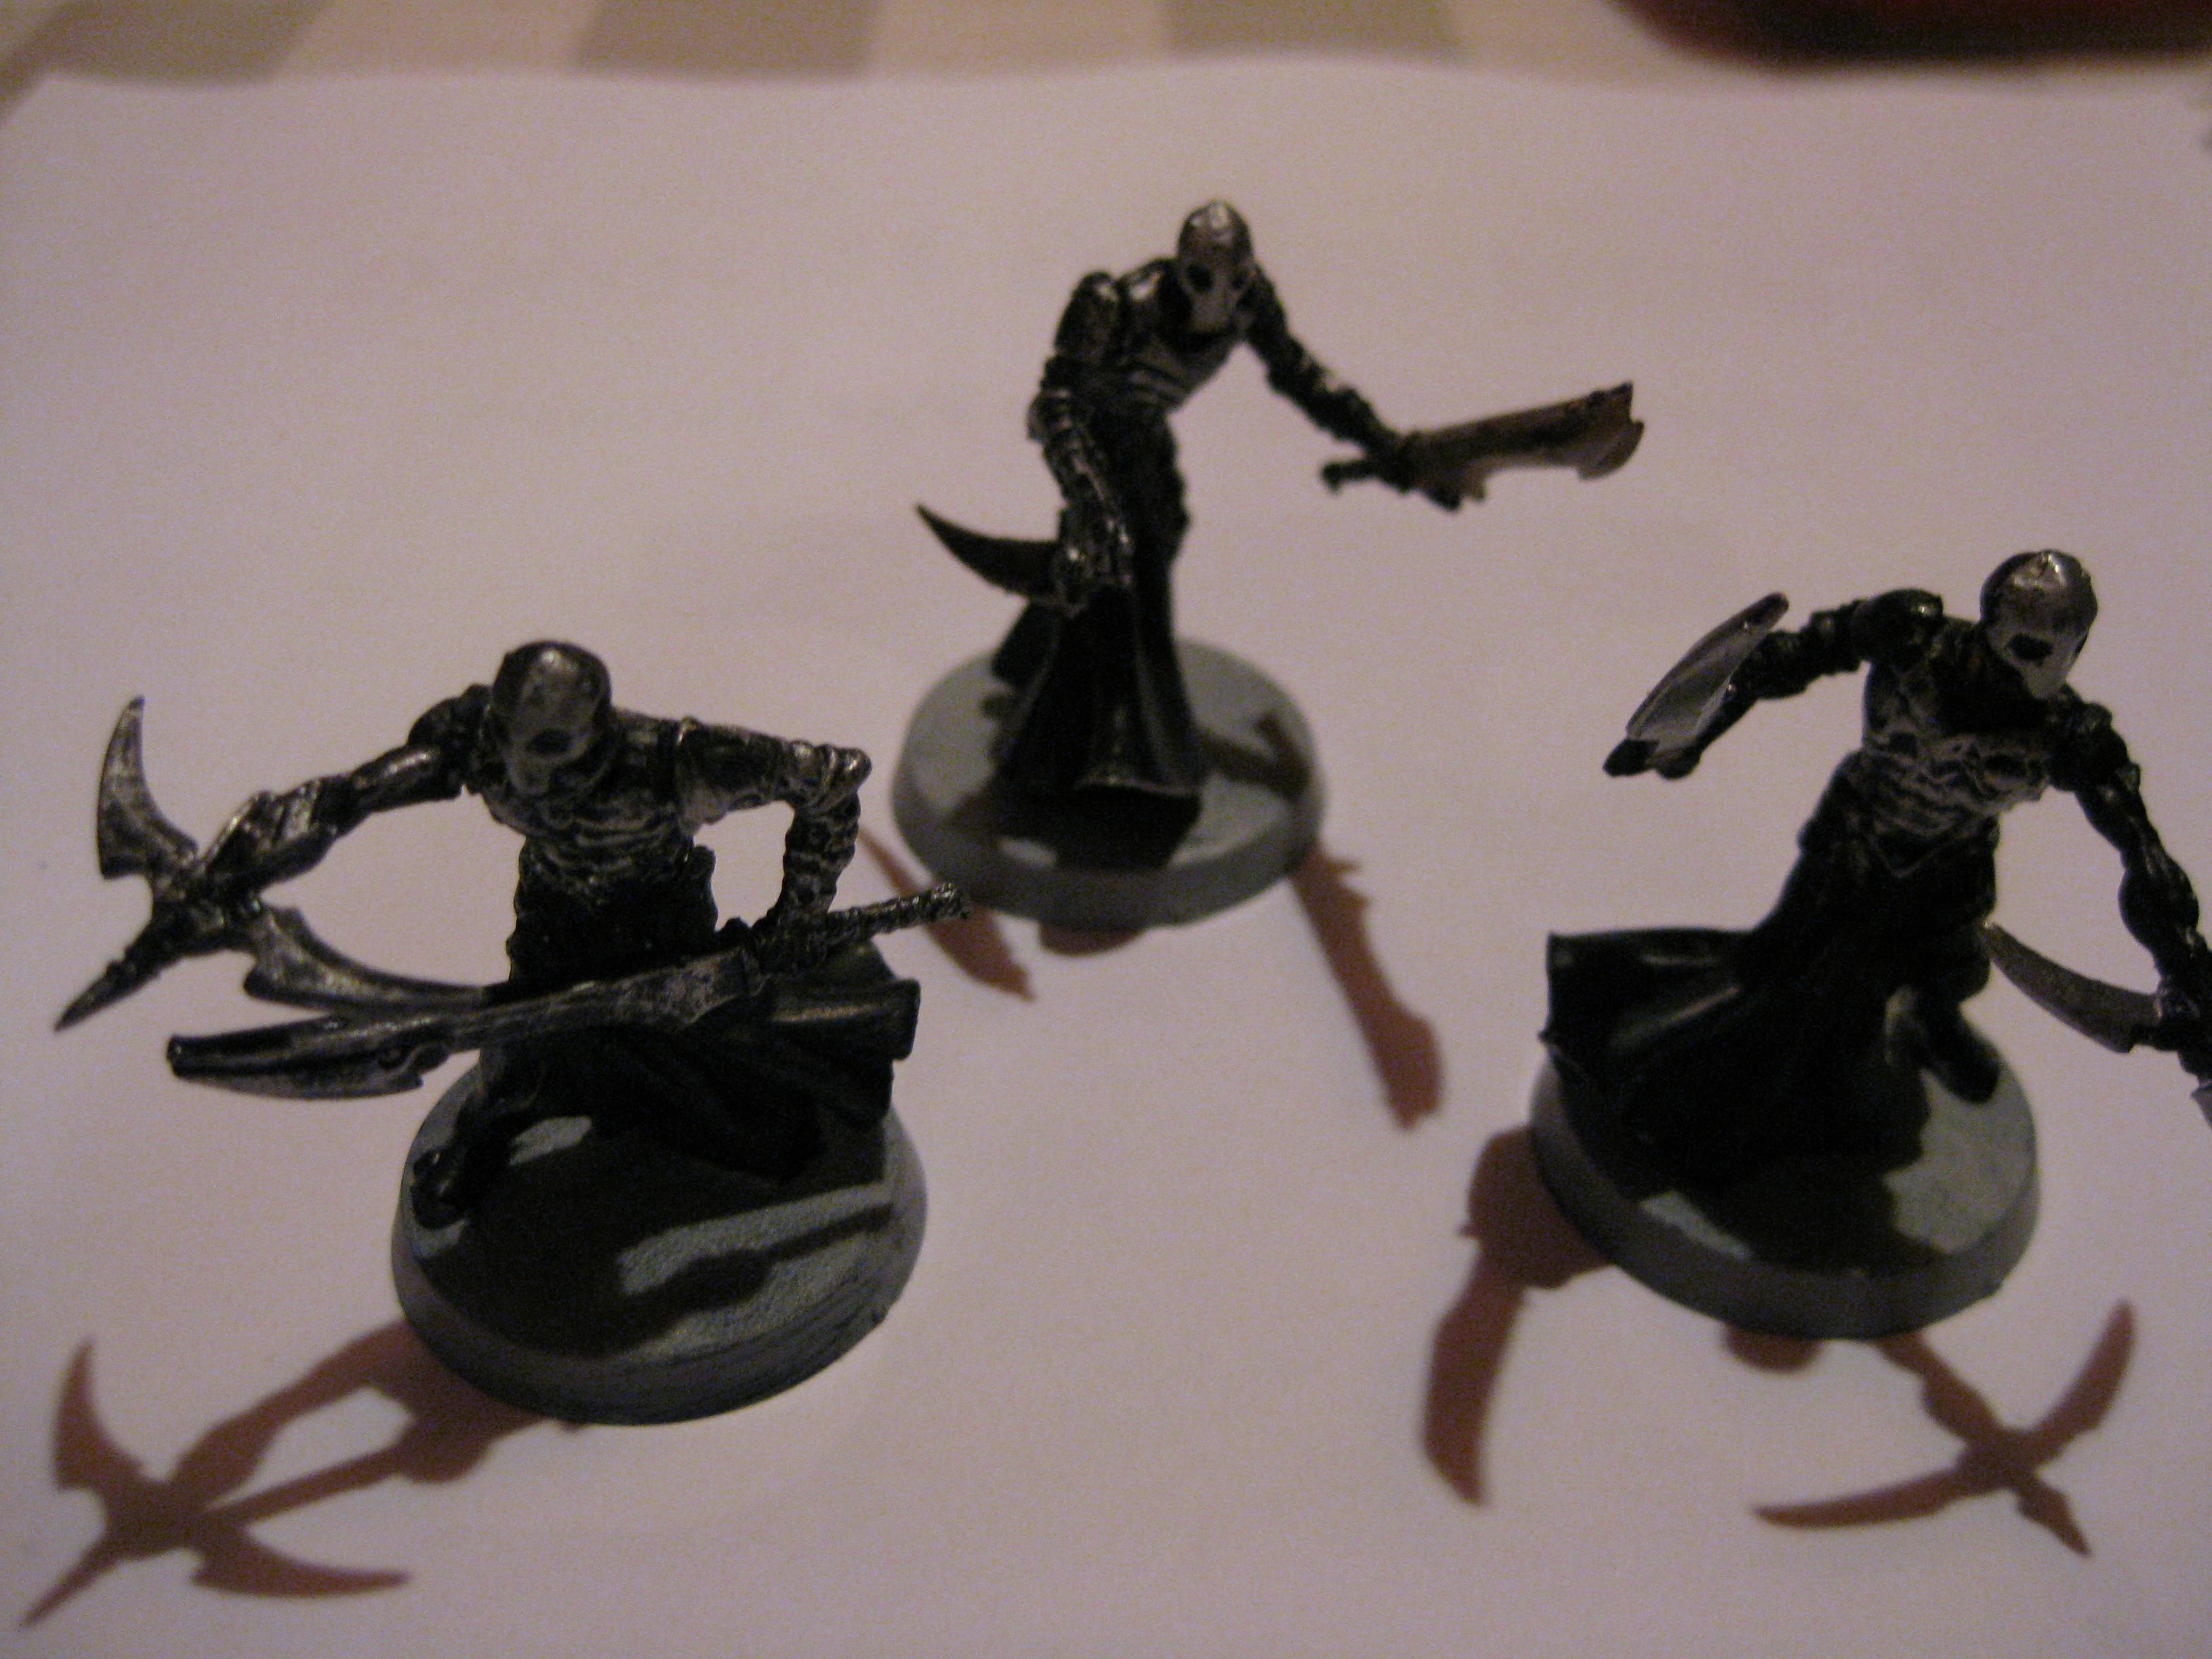 All three servitors. There is a cnotroller guy for these also, but he is unpainted as of yet